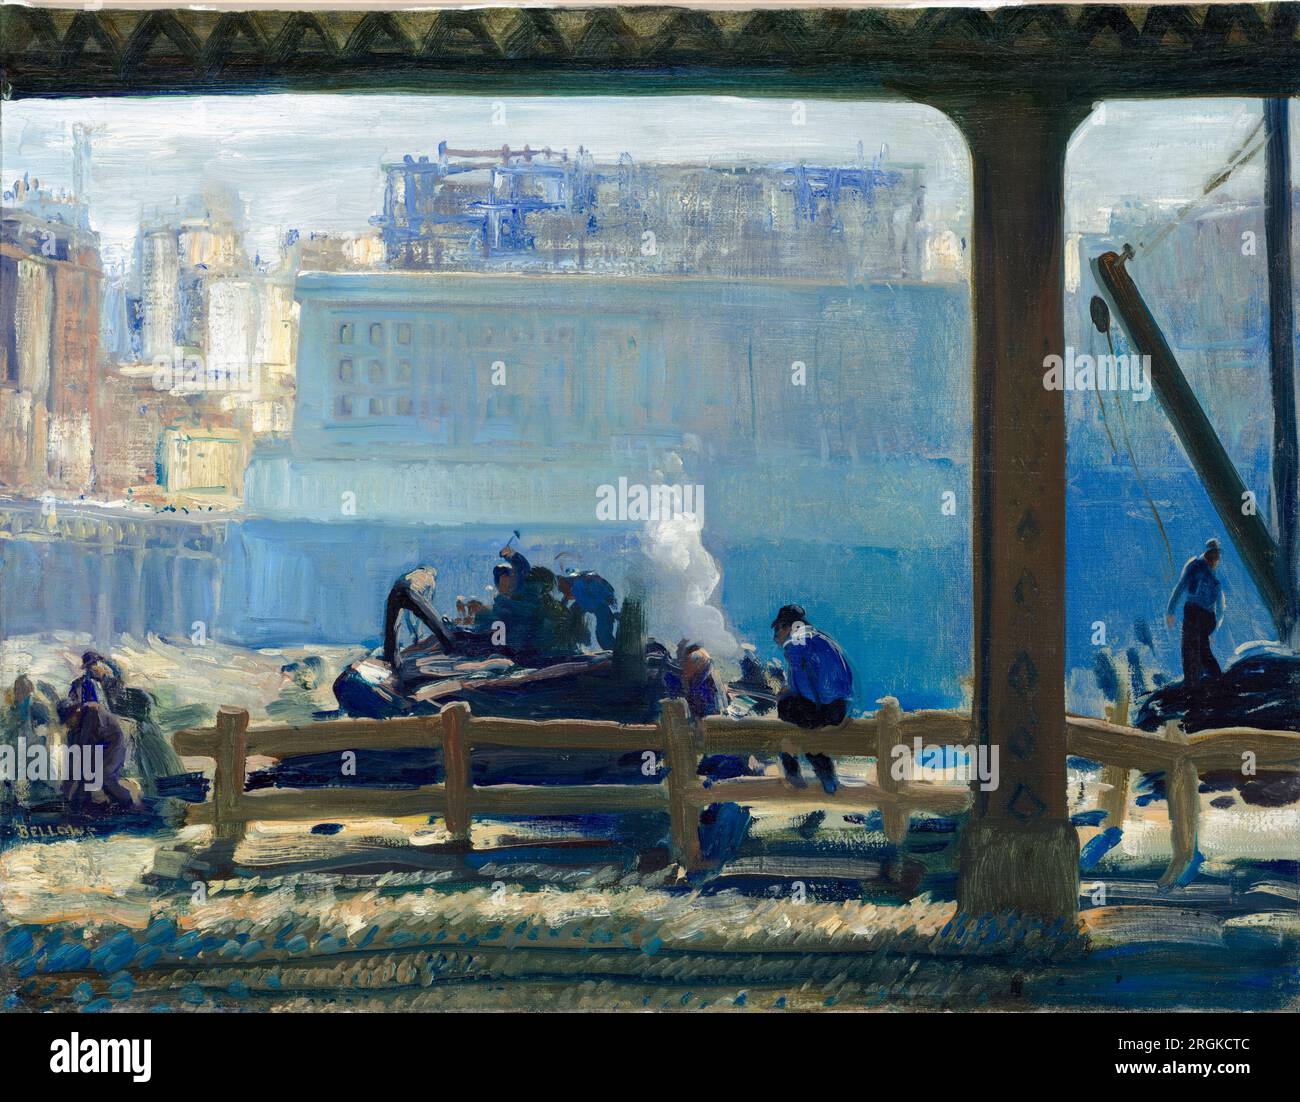 George Bellows, Blue Morning, painting in oil on canvas, 1909 Stock Photo